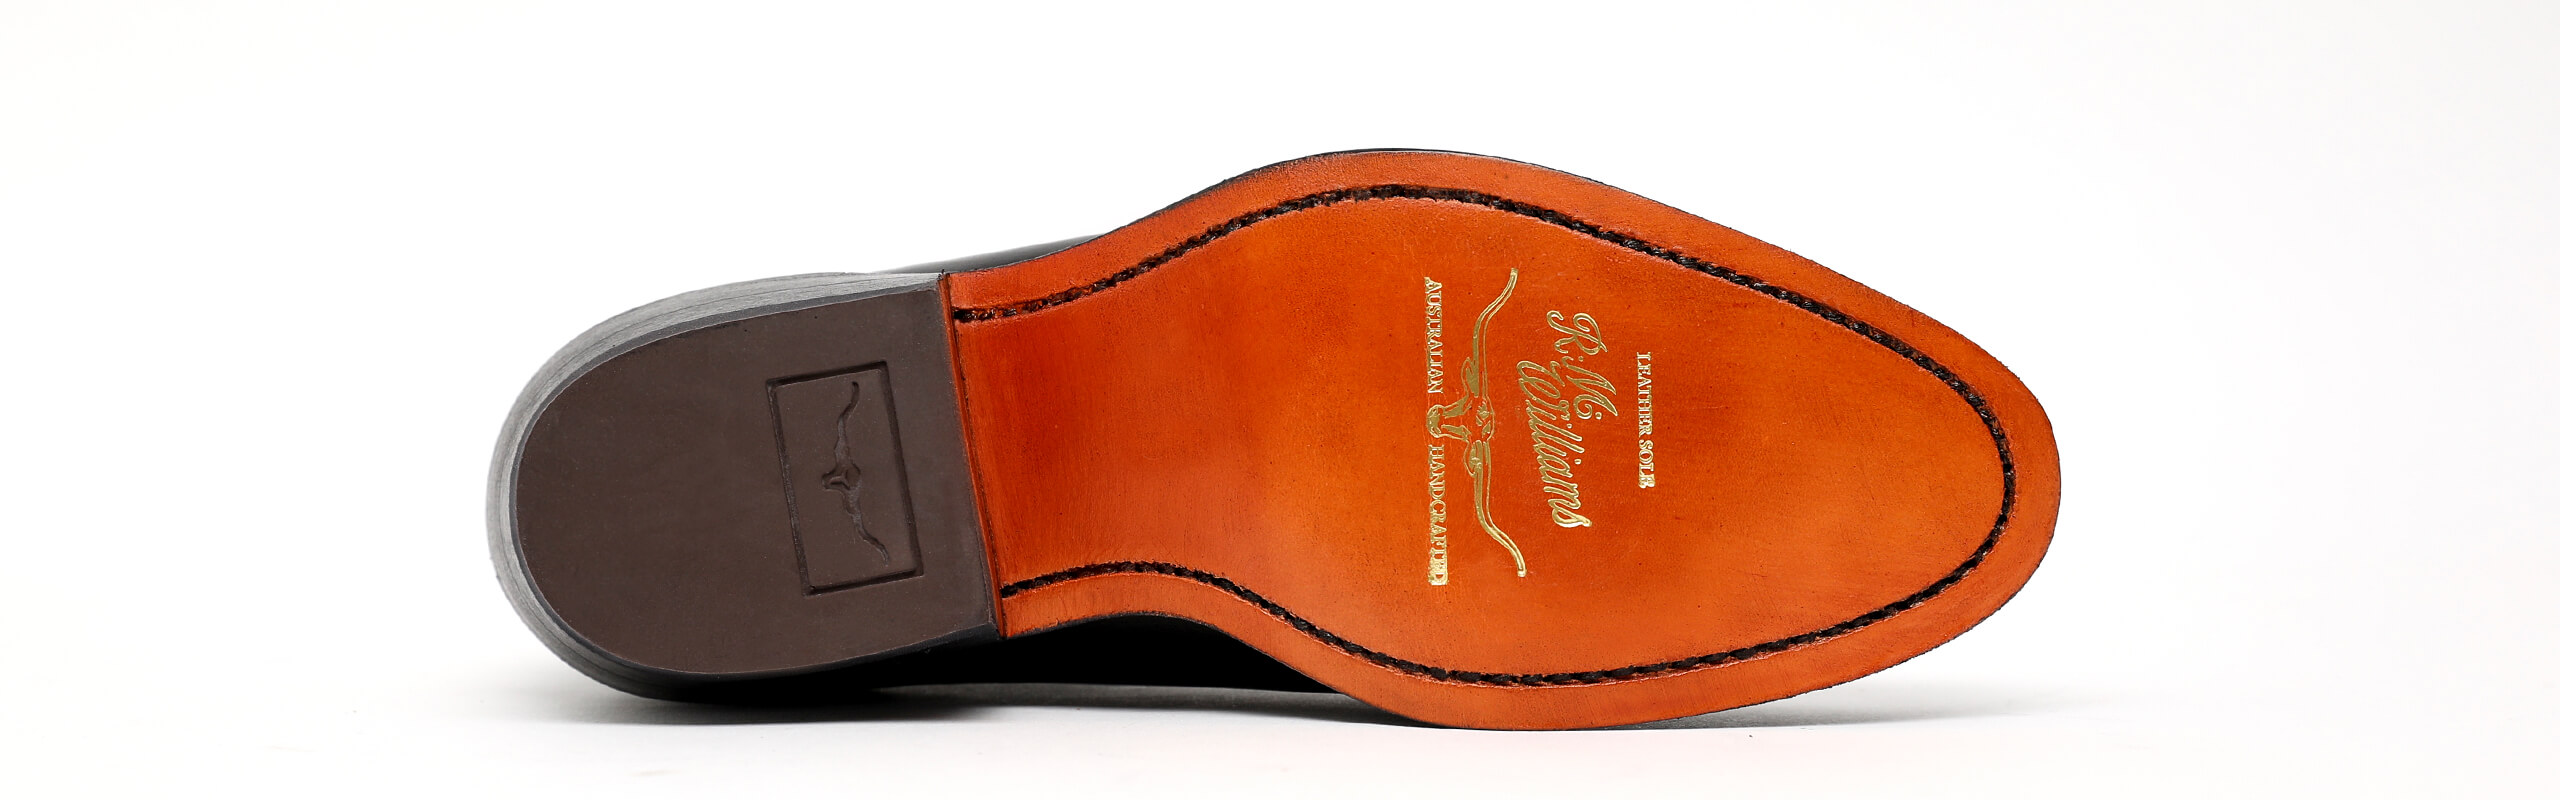 R.M.Williams Lady Yearling leather sole